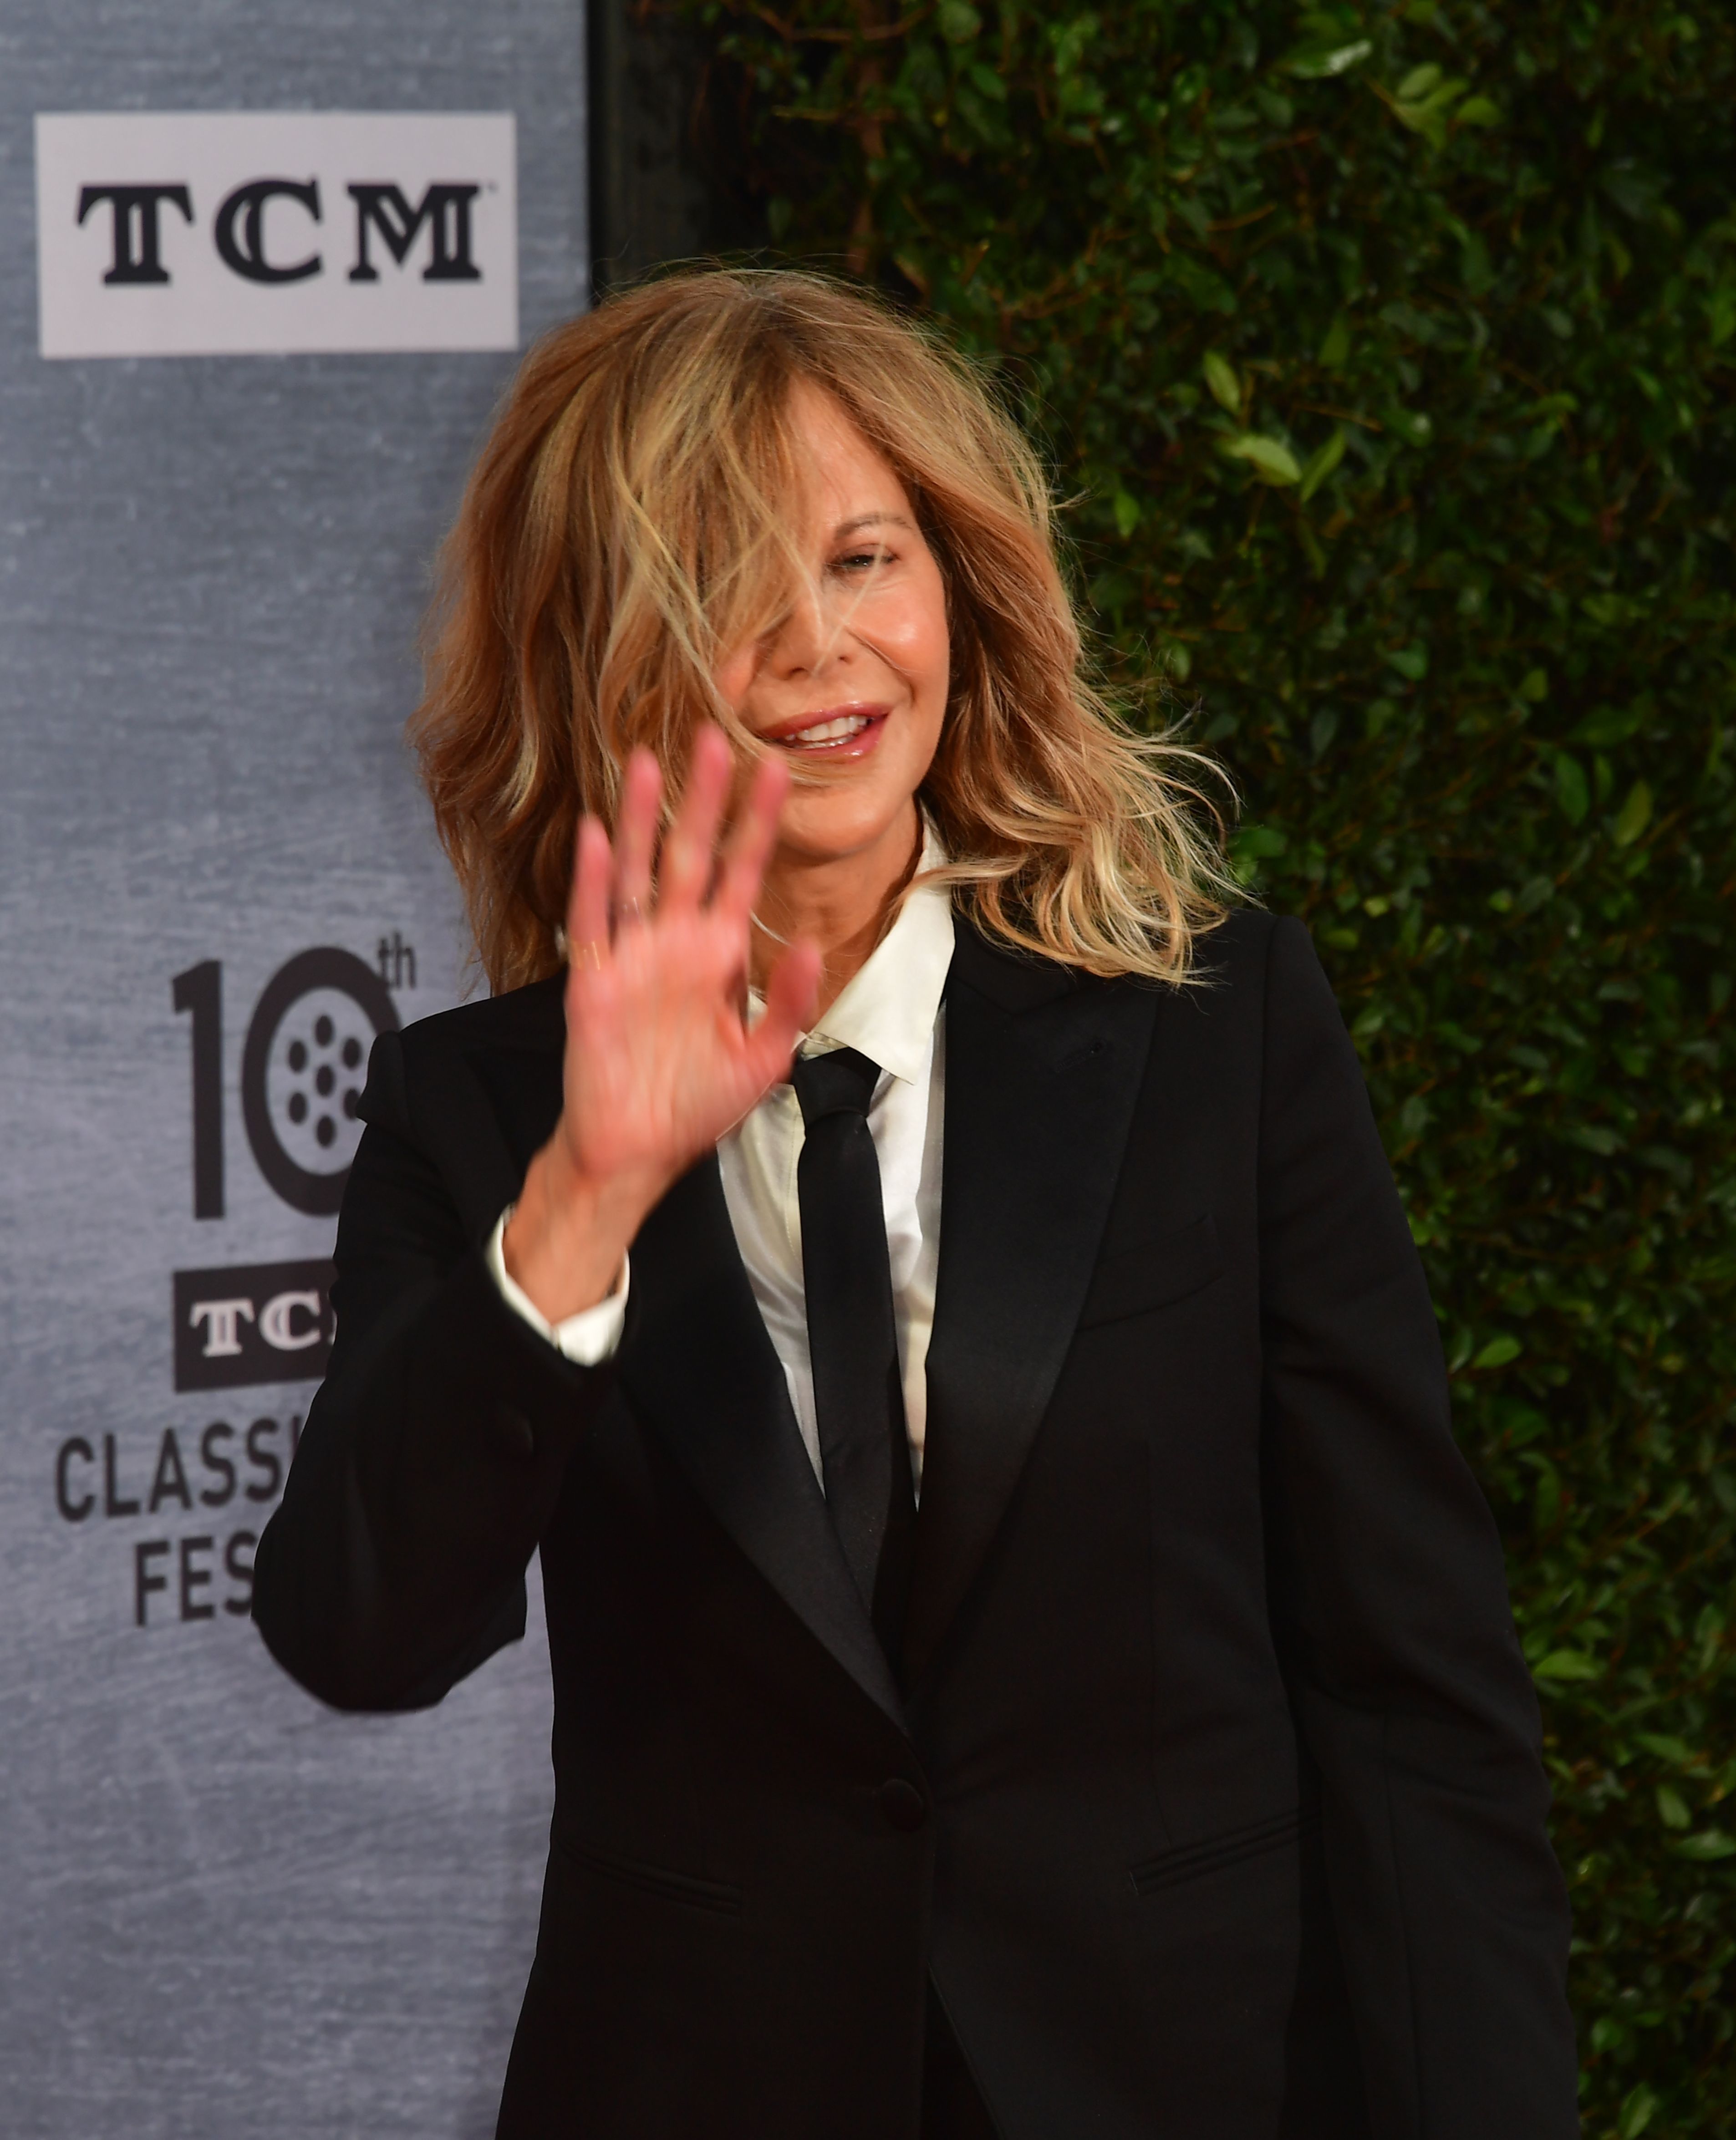 Meg Ryan at the 30th Anniversary Screening of "When Harry Met Sally" at the TCM Classic Film Festival on April 11, 2019, in Hollywood | Source: Getty Images